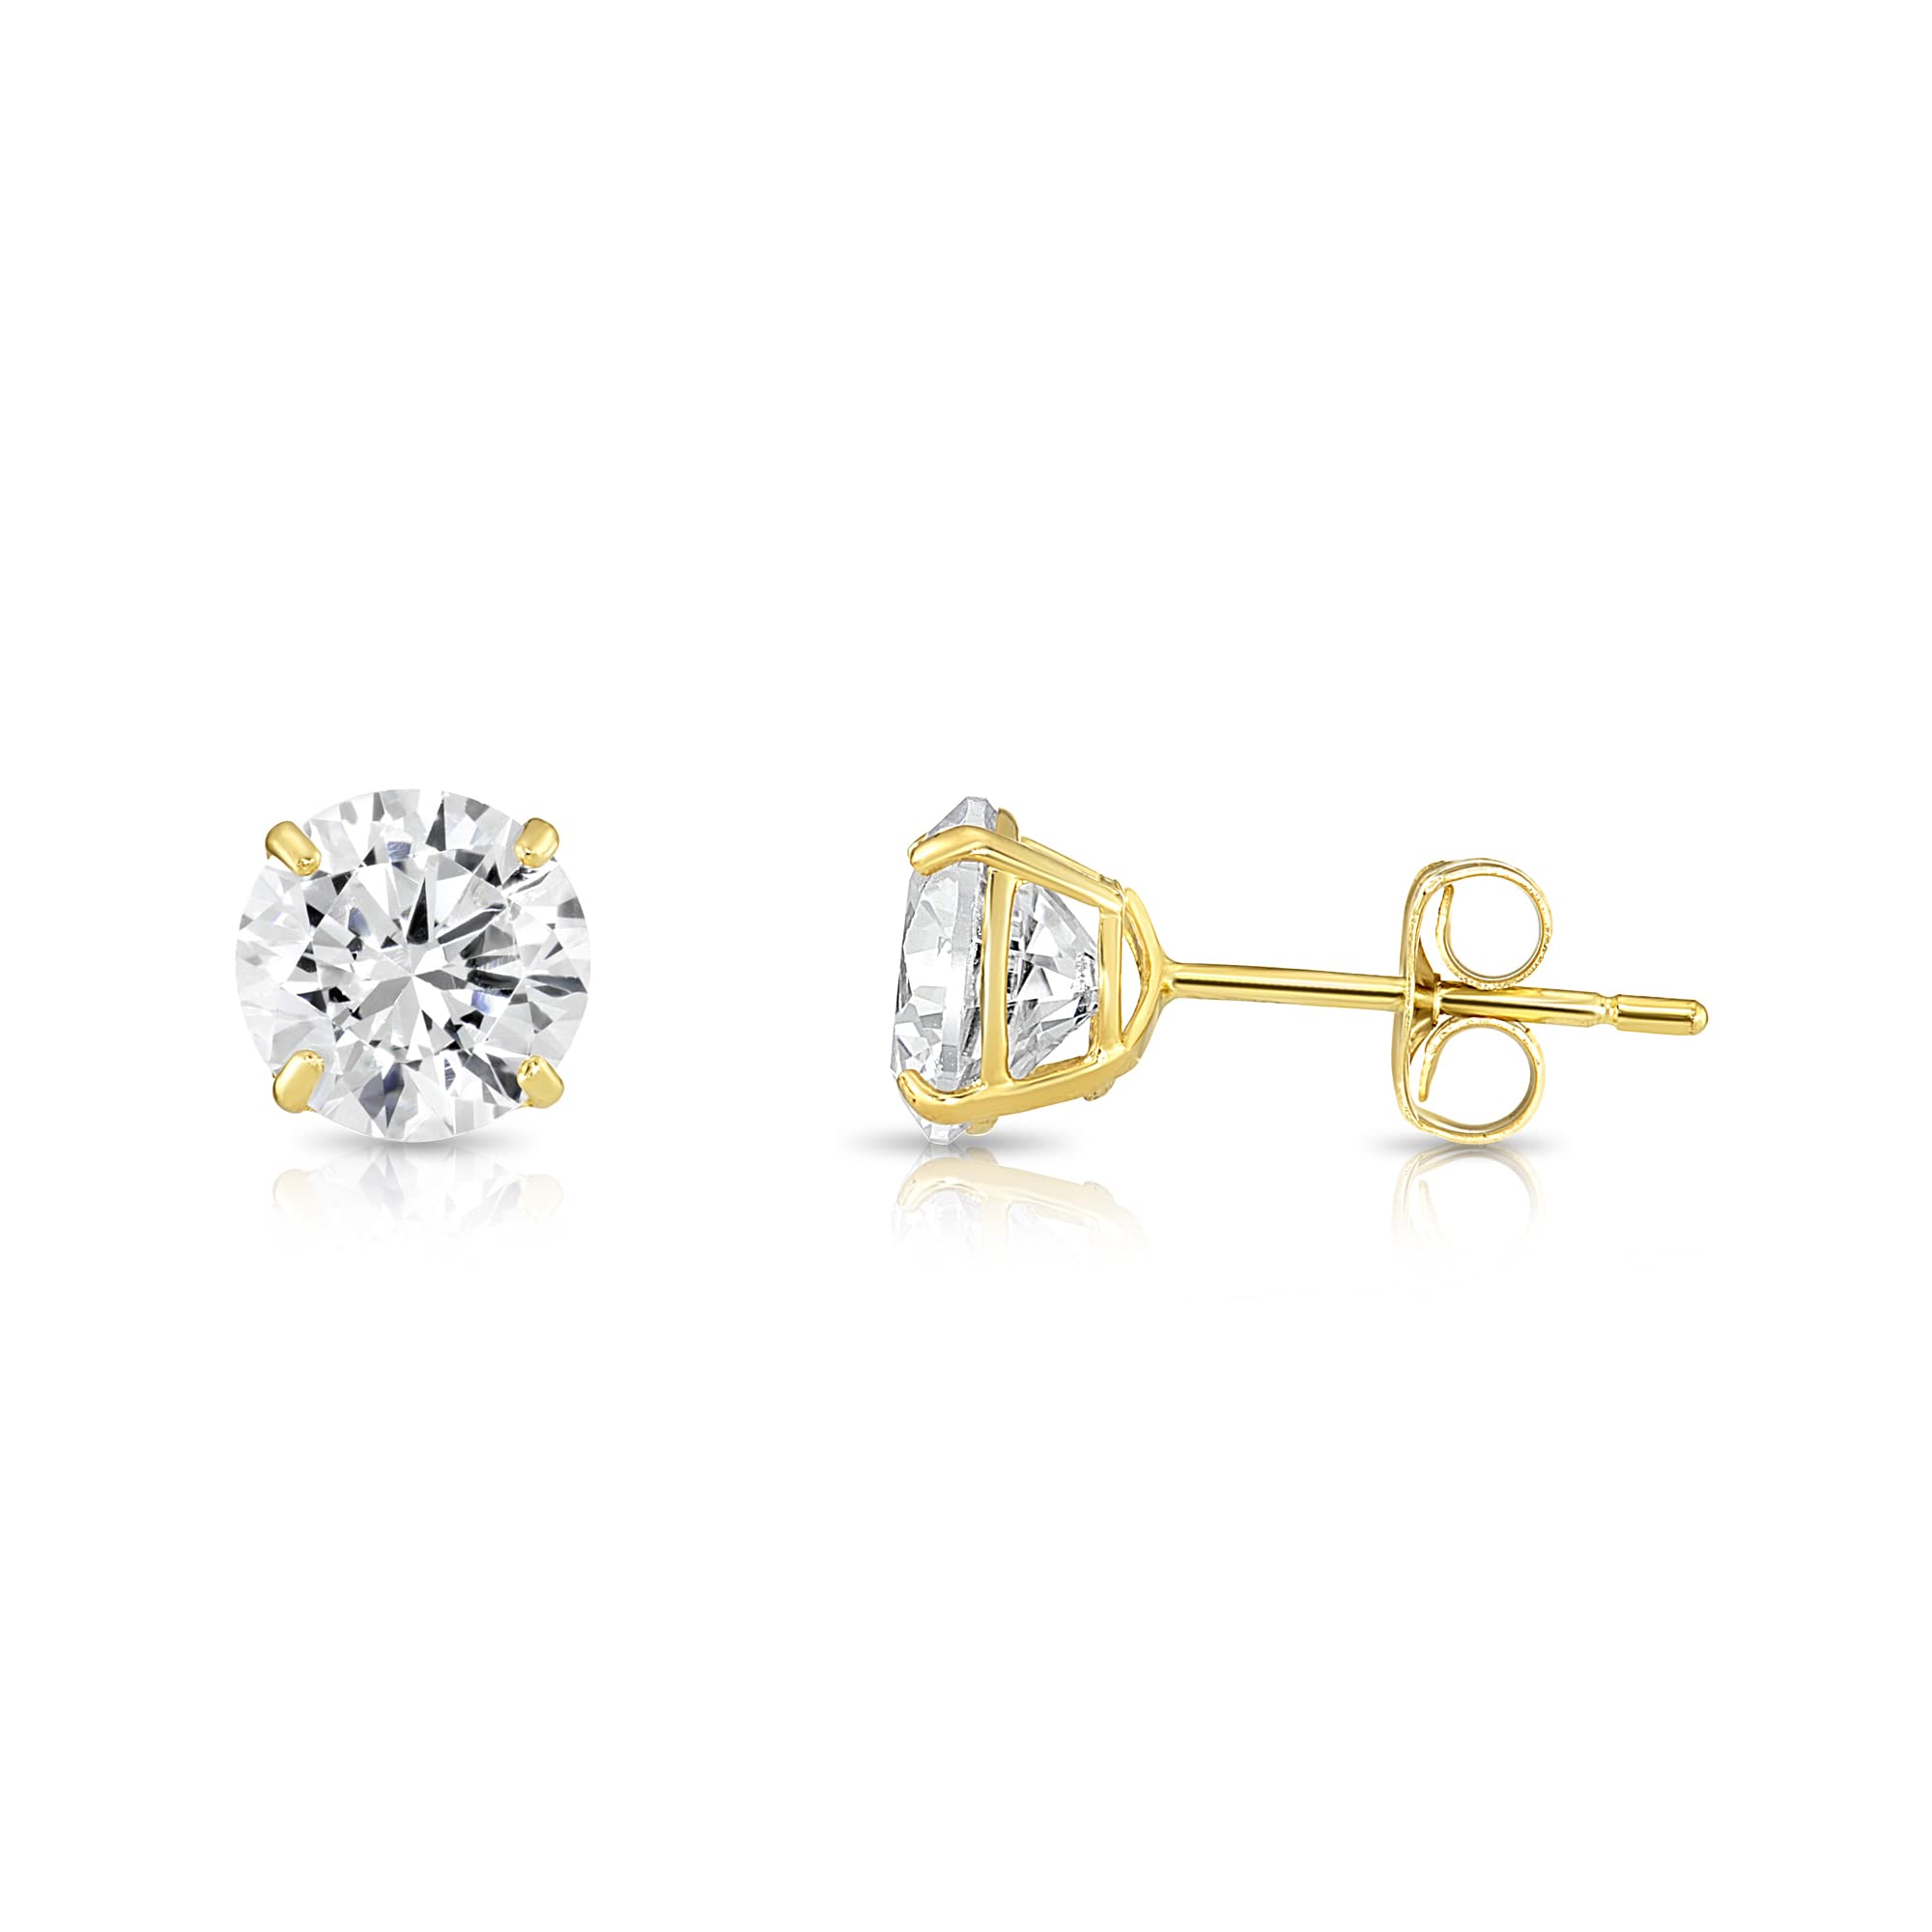 14k Yellow Gold Solitaire Round Cubic Zirconia CZ Stud Earrings with Gold butterfly Pushbacks